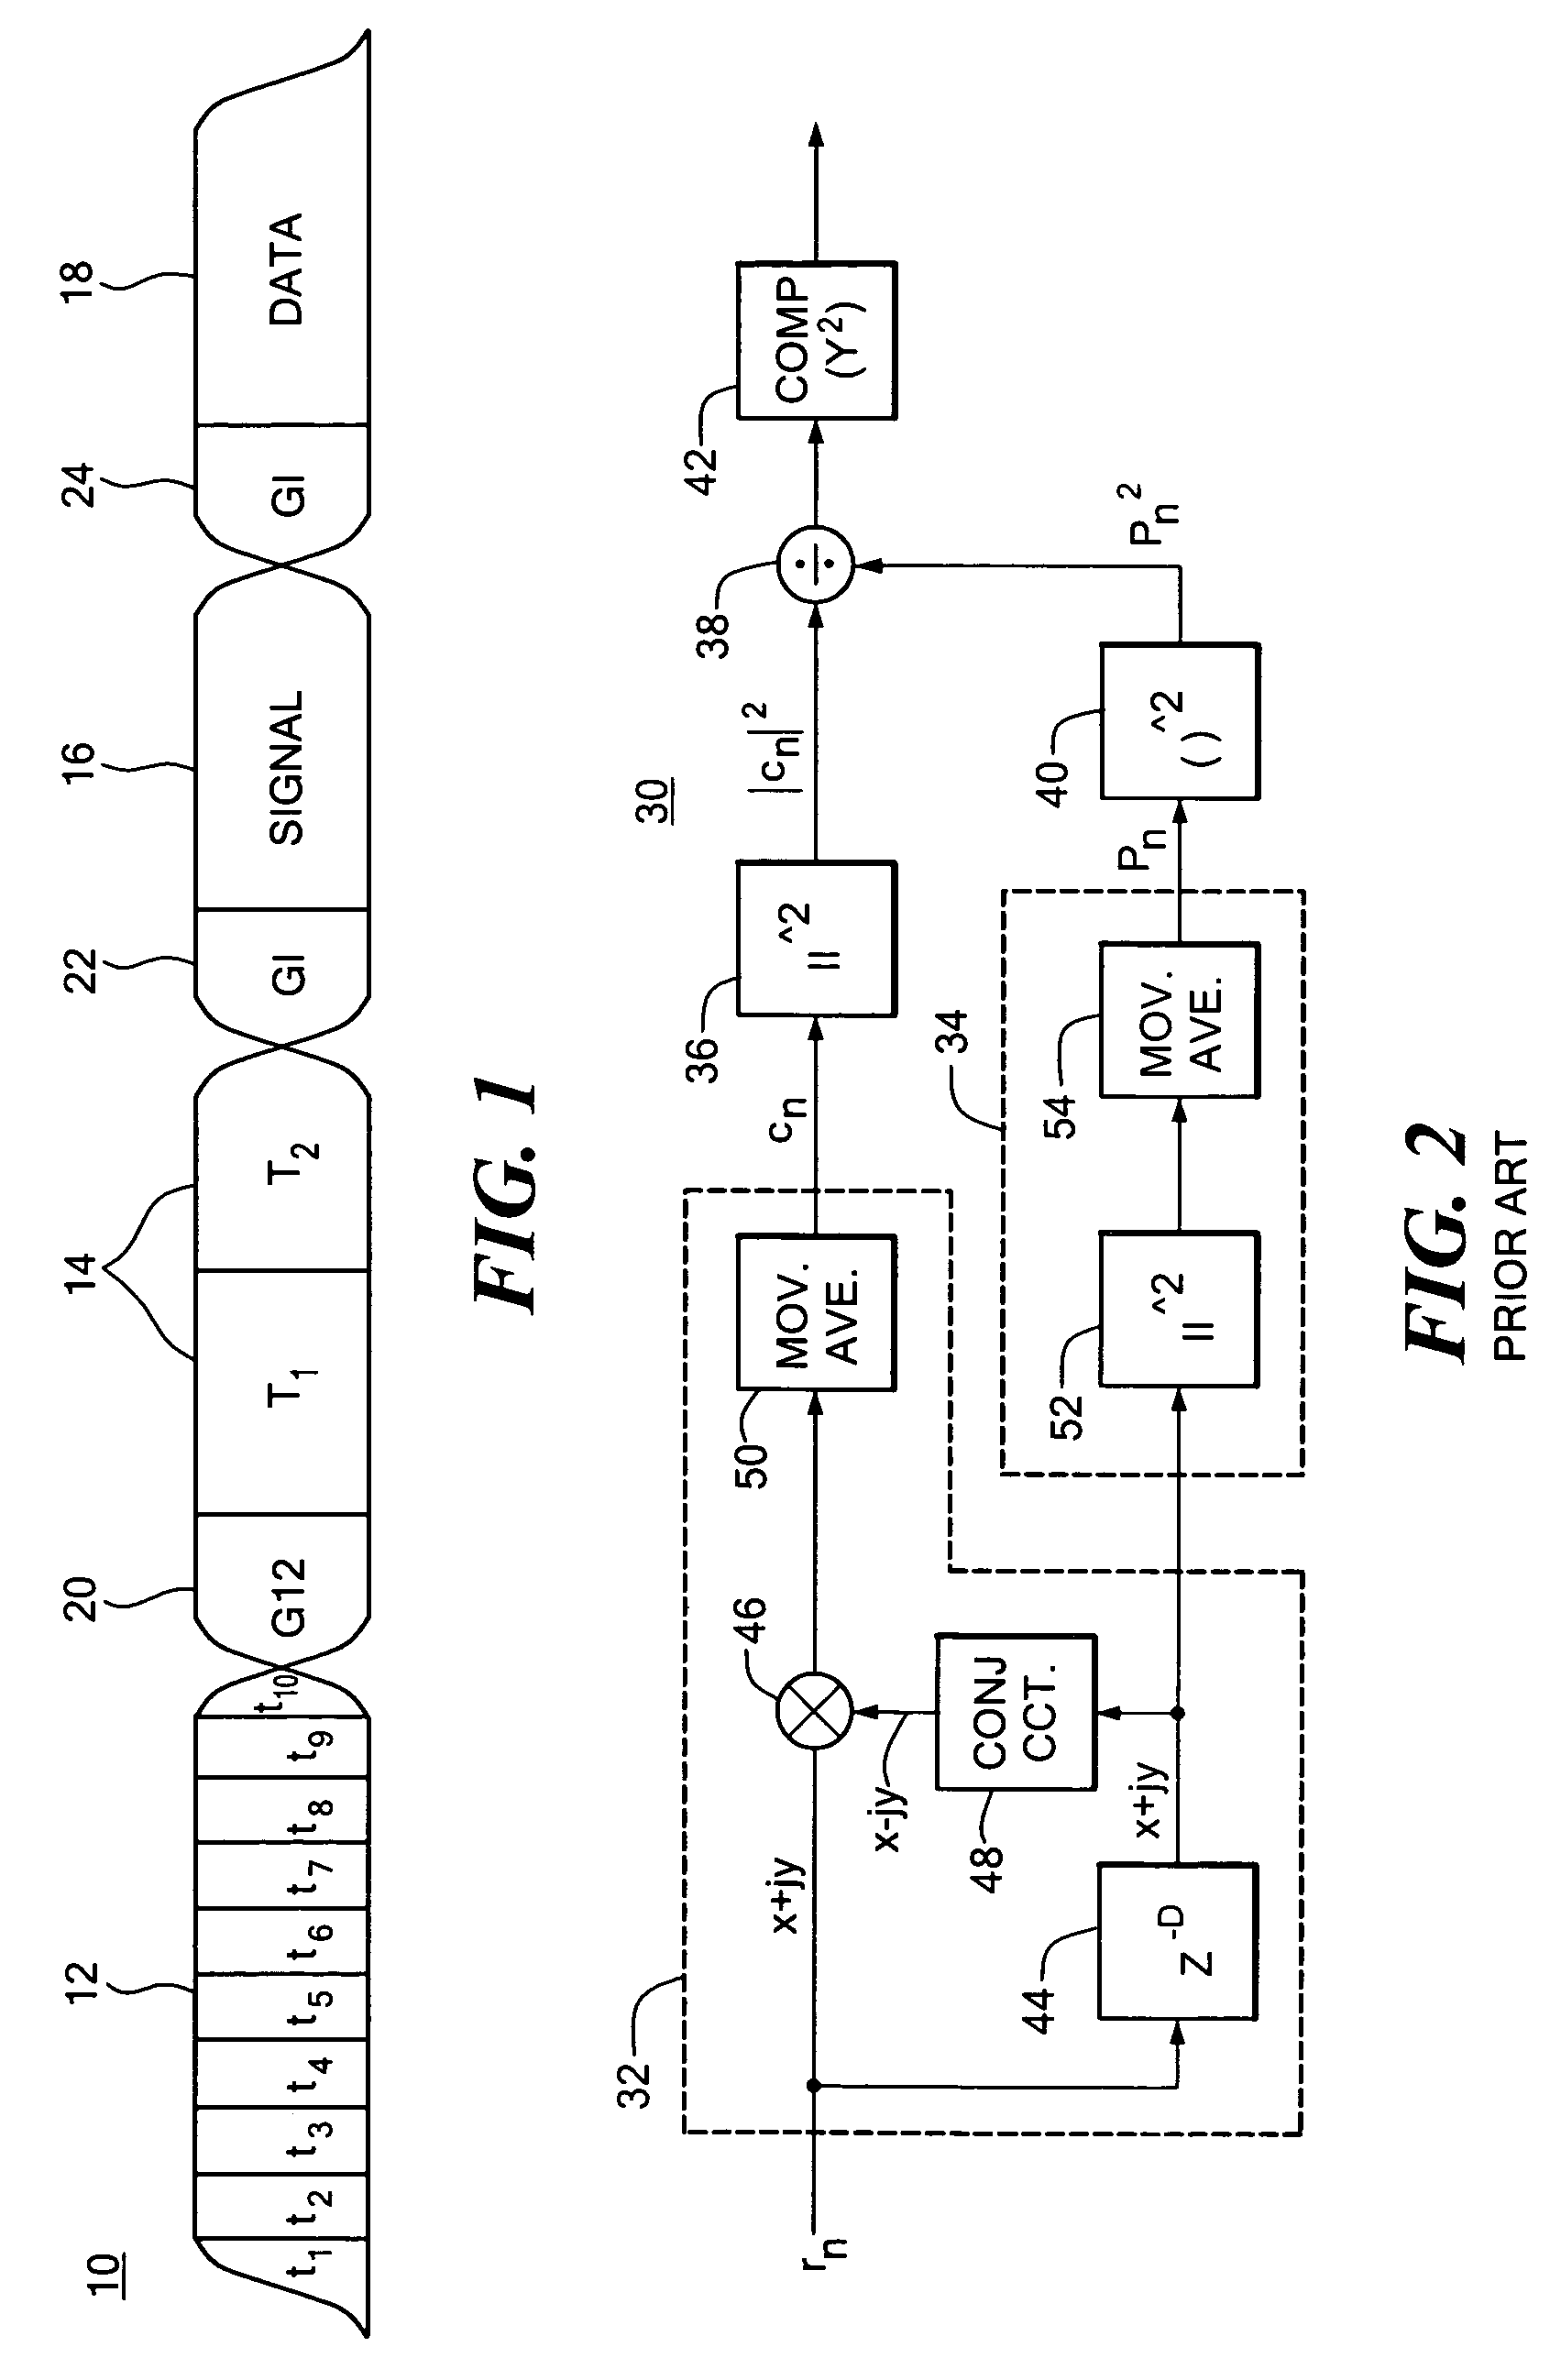 Packet detection system and method